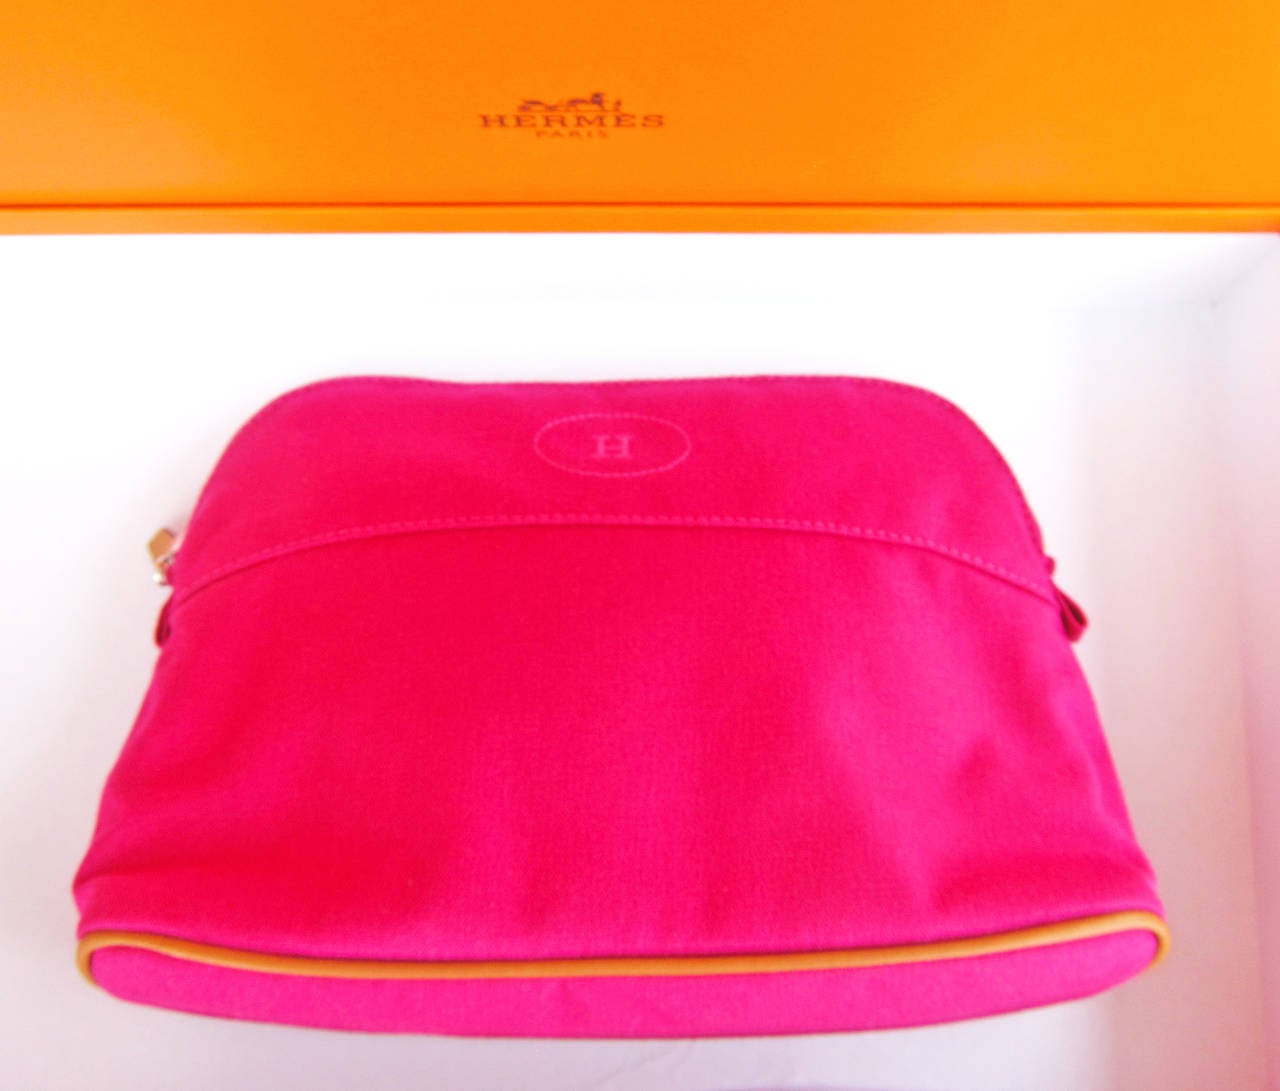 Hermes Fuchsia Bolide Toiletry Beach and Travel Case MM 1